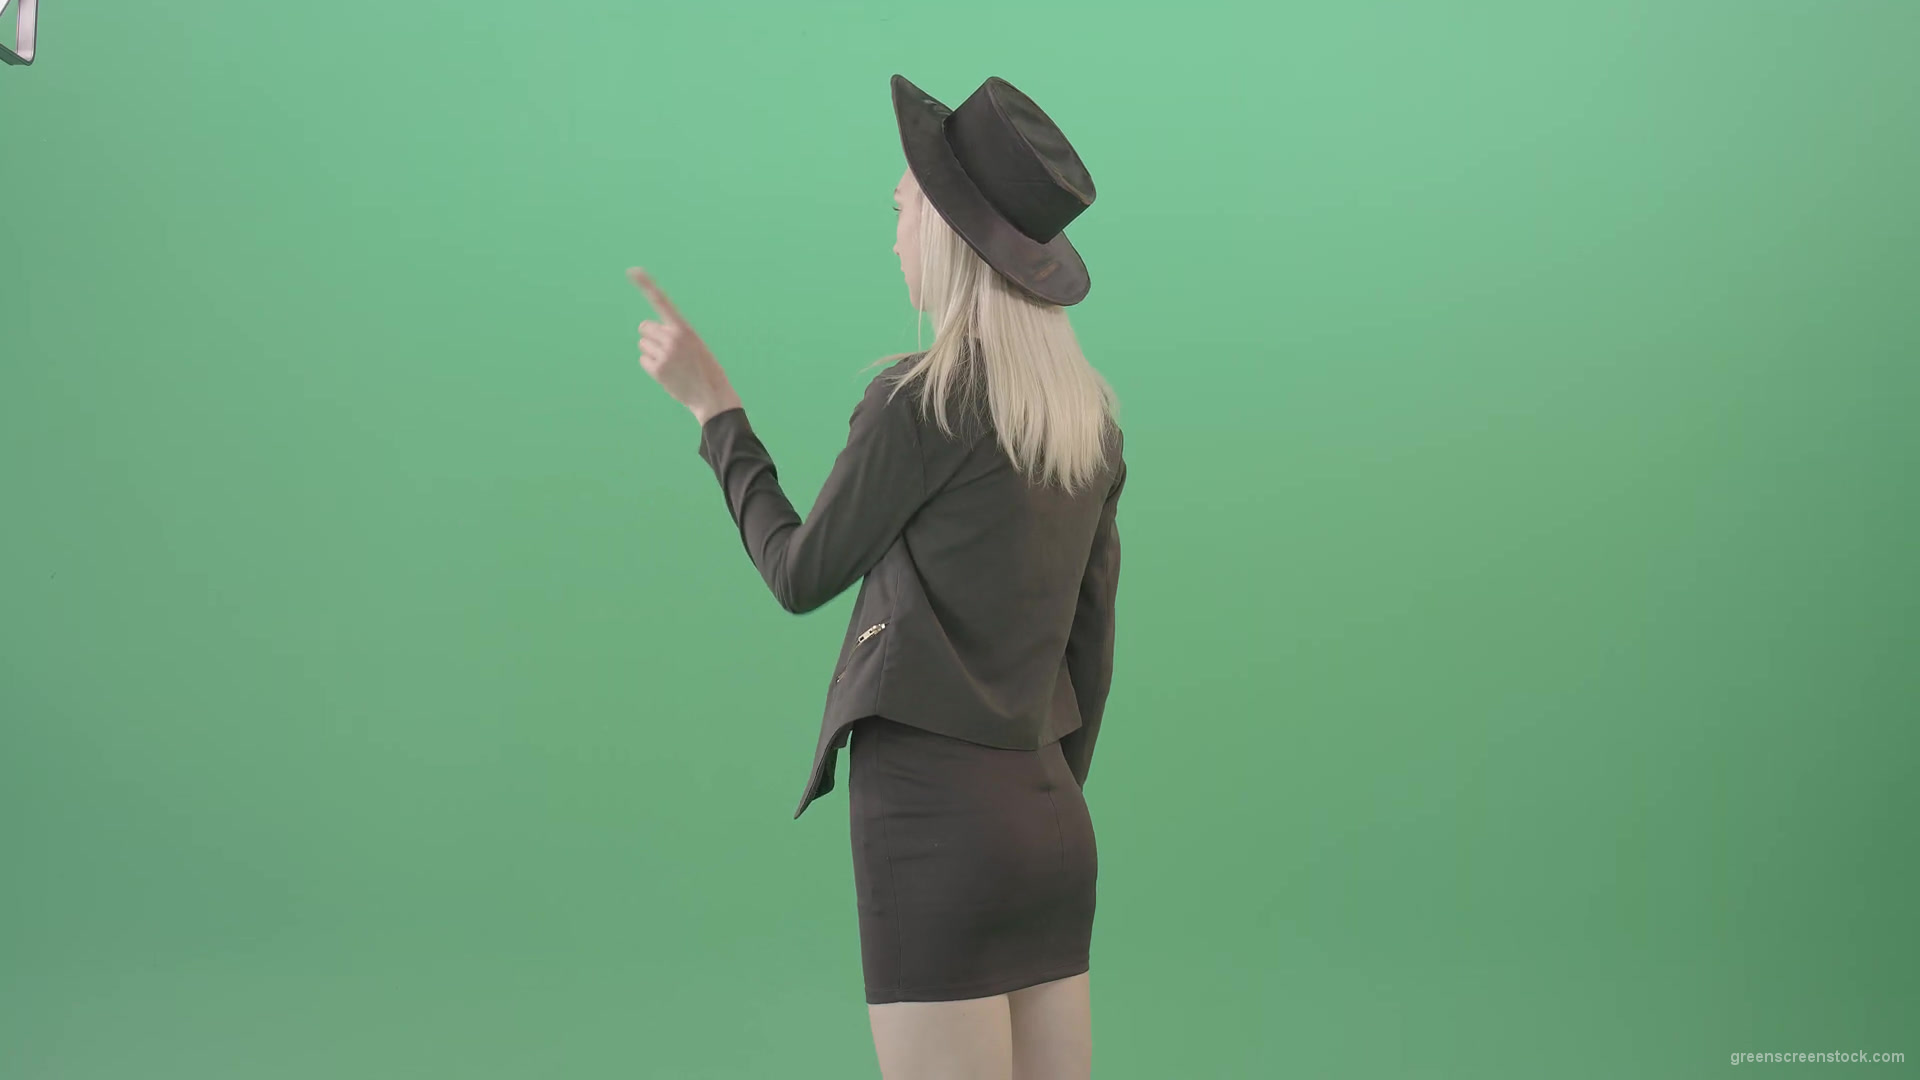 Back-view-black-costume-blonde-girl-looking-virtual-products-on-touch-screen-4K-Green-Screen-Video-Footage-1920_002 Green Screen Stock